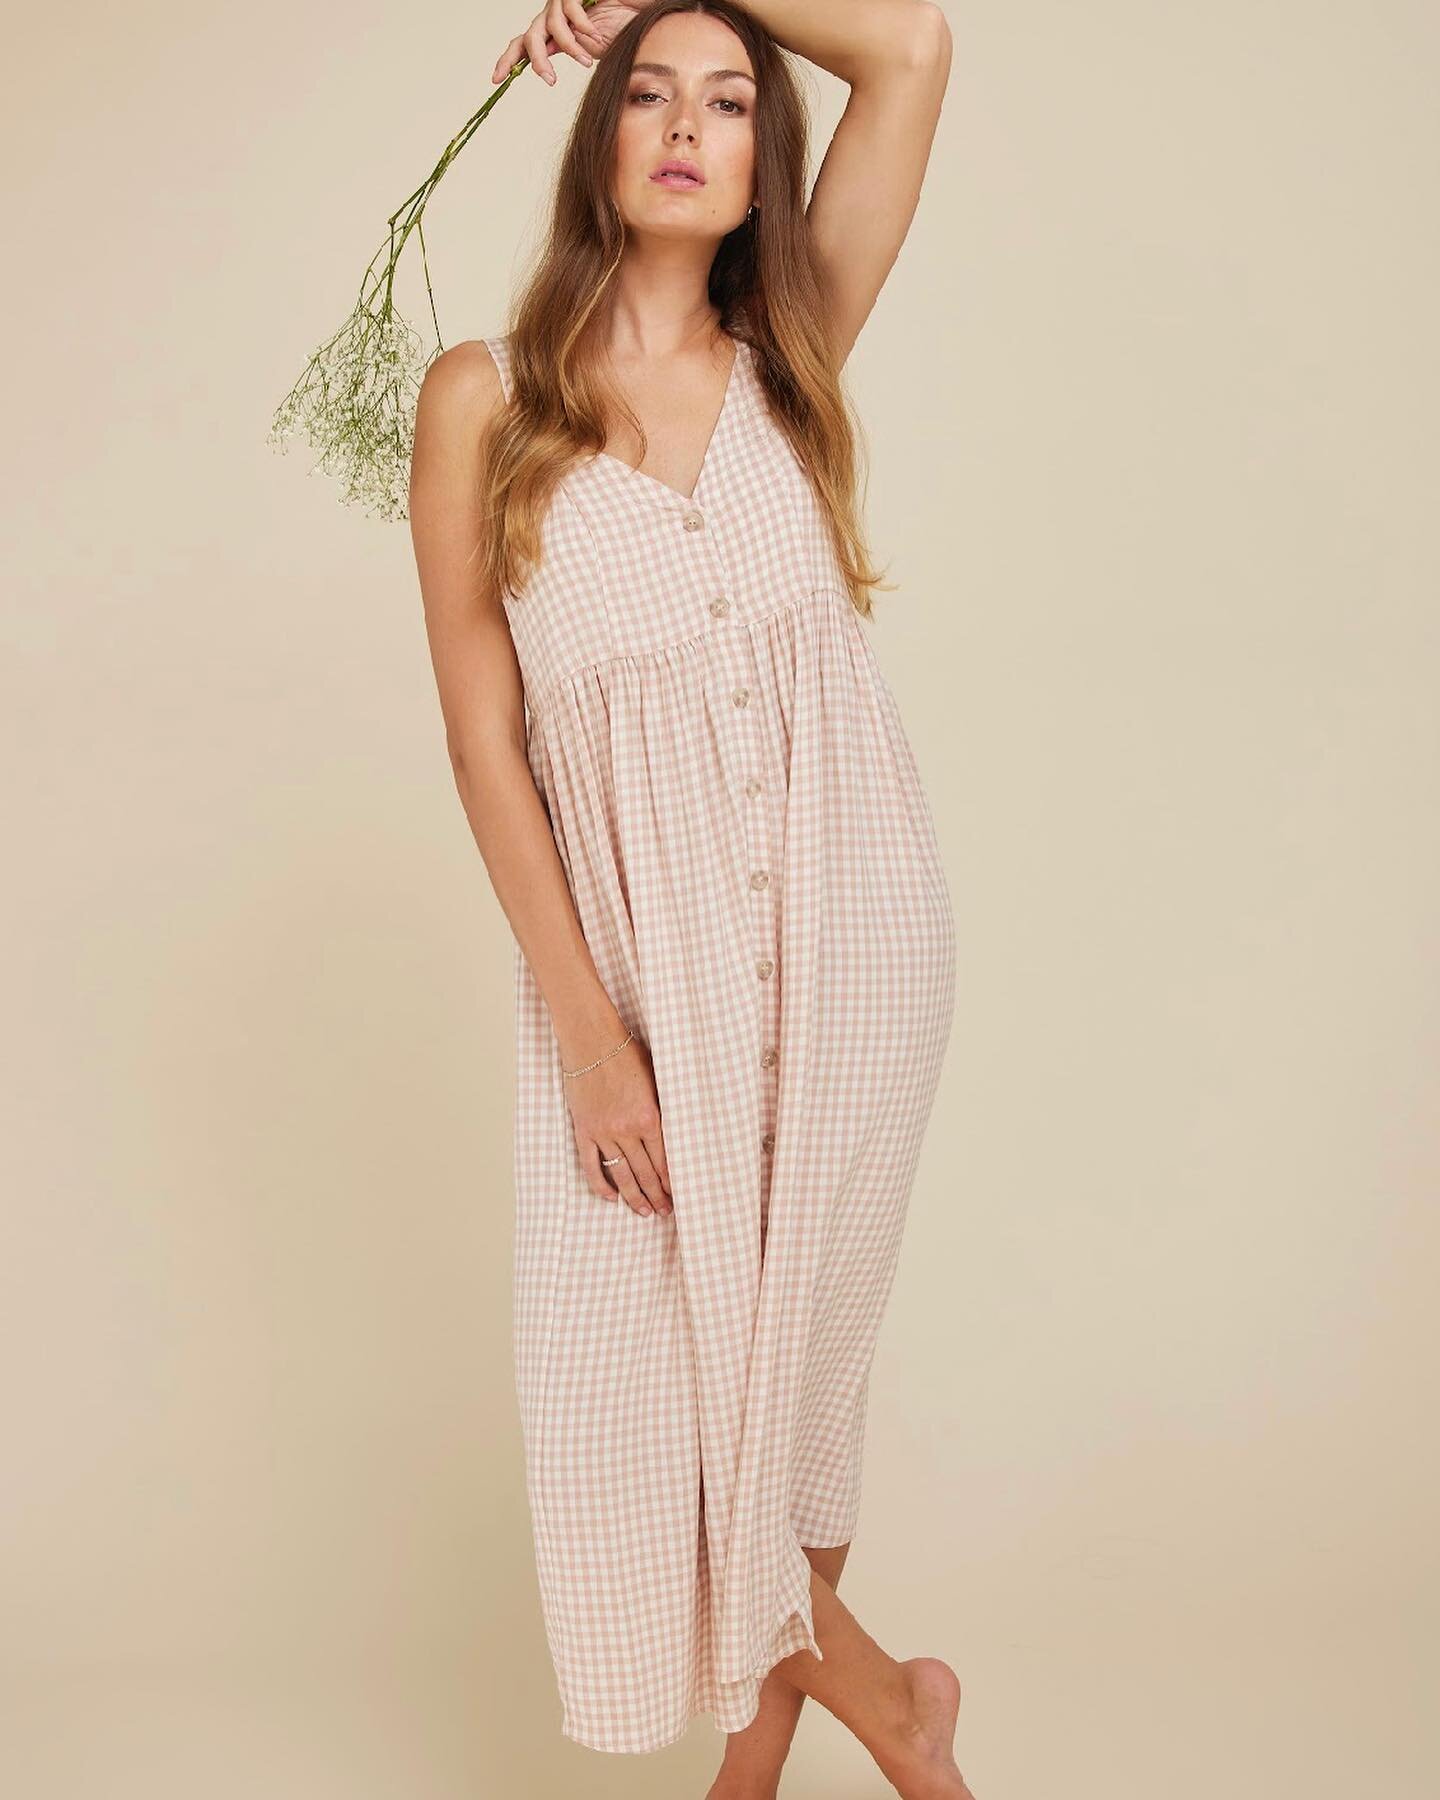 The dress of summer. MAKENZIE 🎀

Bra friendly, nursing friendly, loose for the hot days, cute, efforless 🤍 She checks a lot of boxes! 

Tap to shop  the MAKENZIE 🎀

Sustainable fashion, fashion trends, styling inspiration, spring fashion ideas, ca